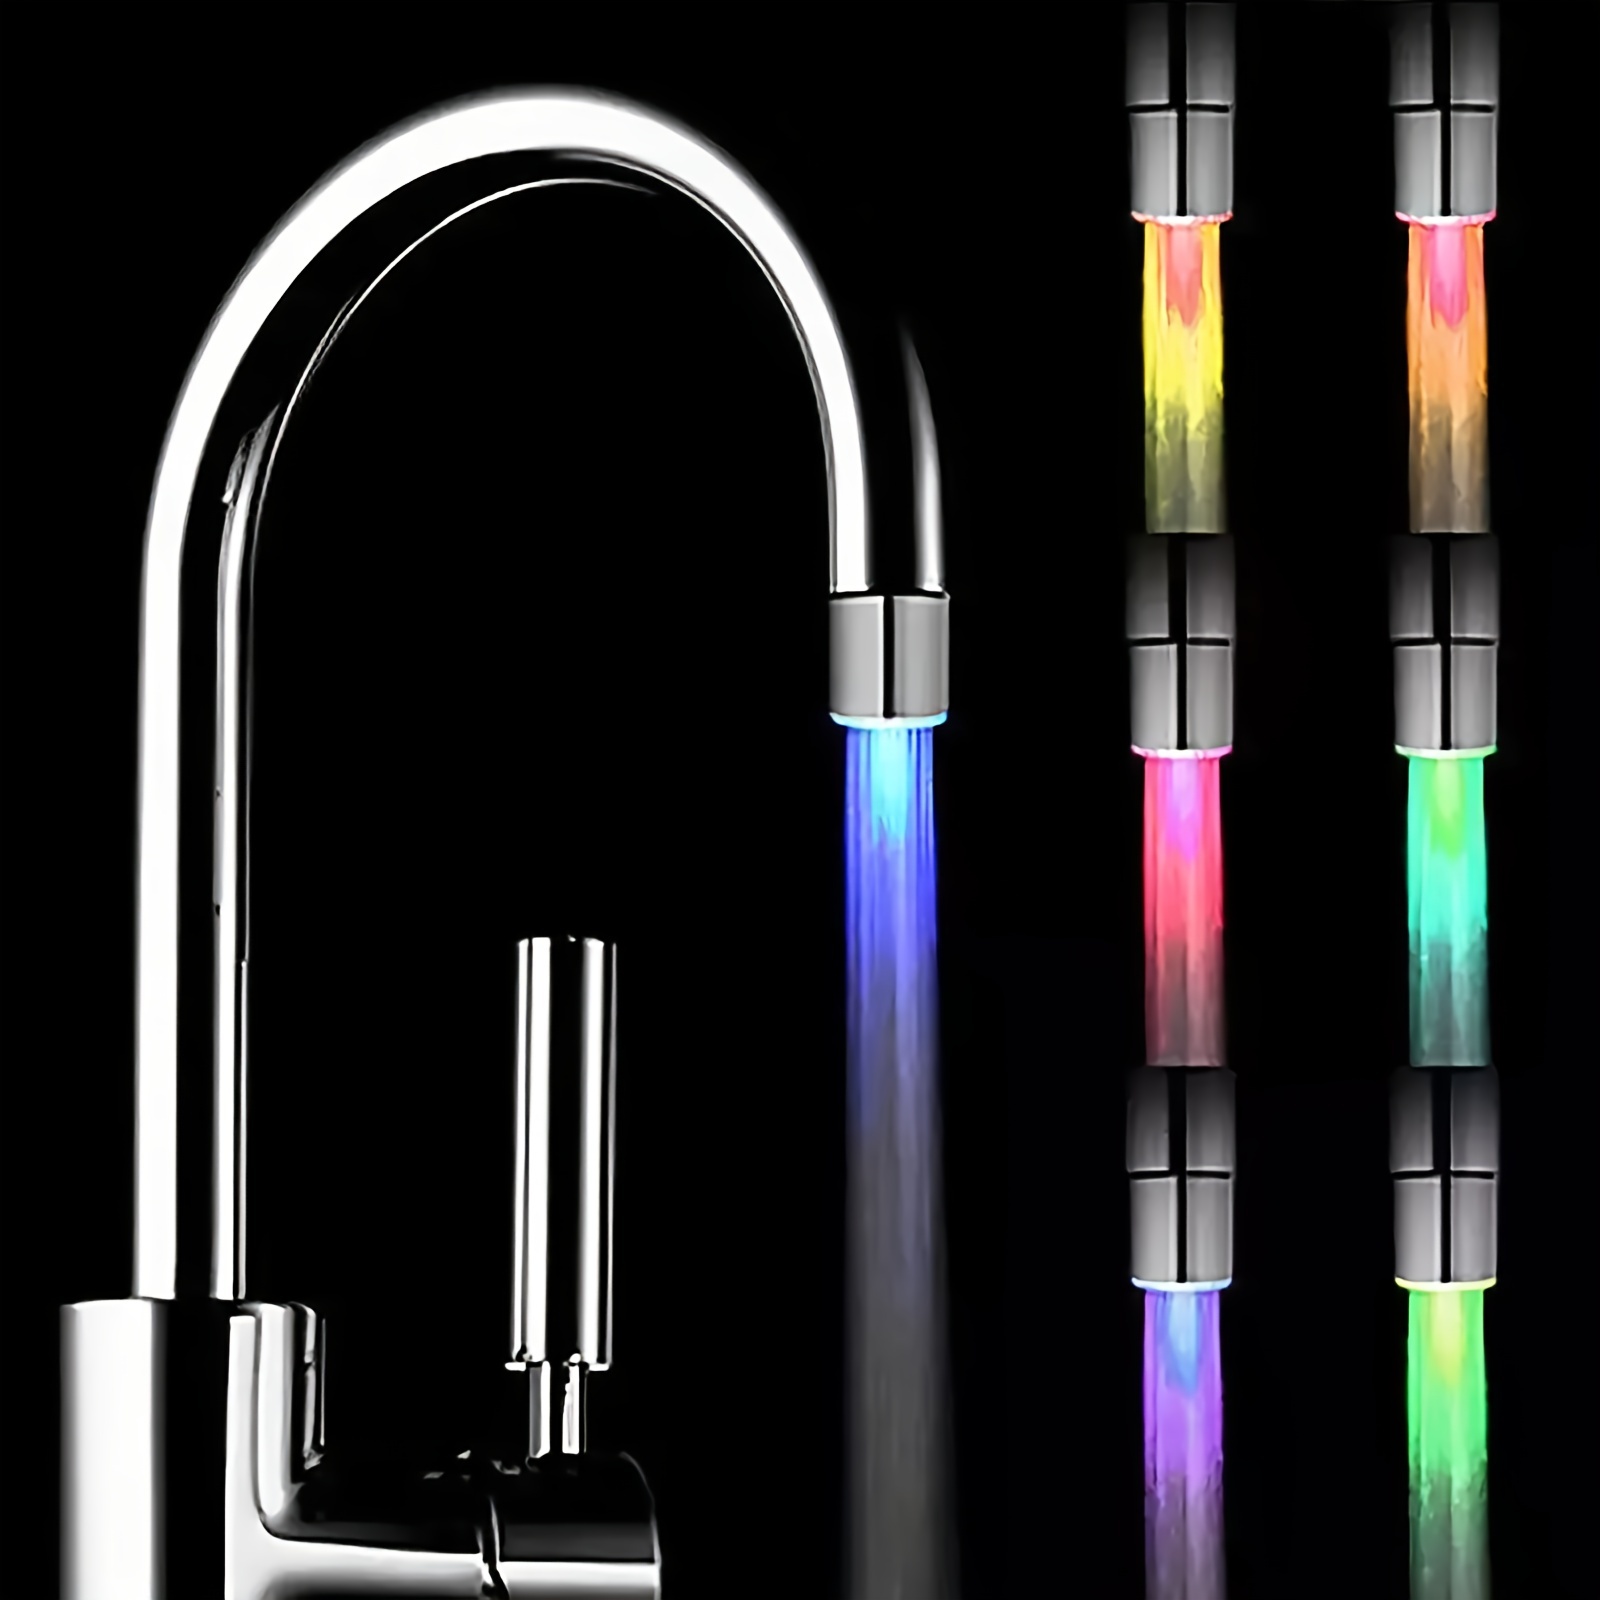  Light Up Water Faucet, Growing Blue Color LED Water